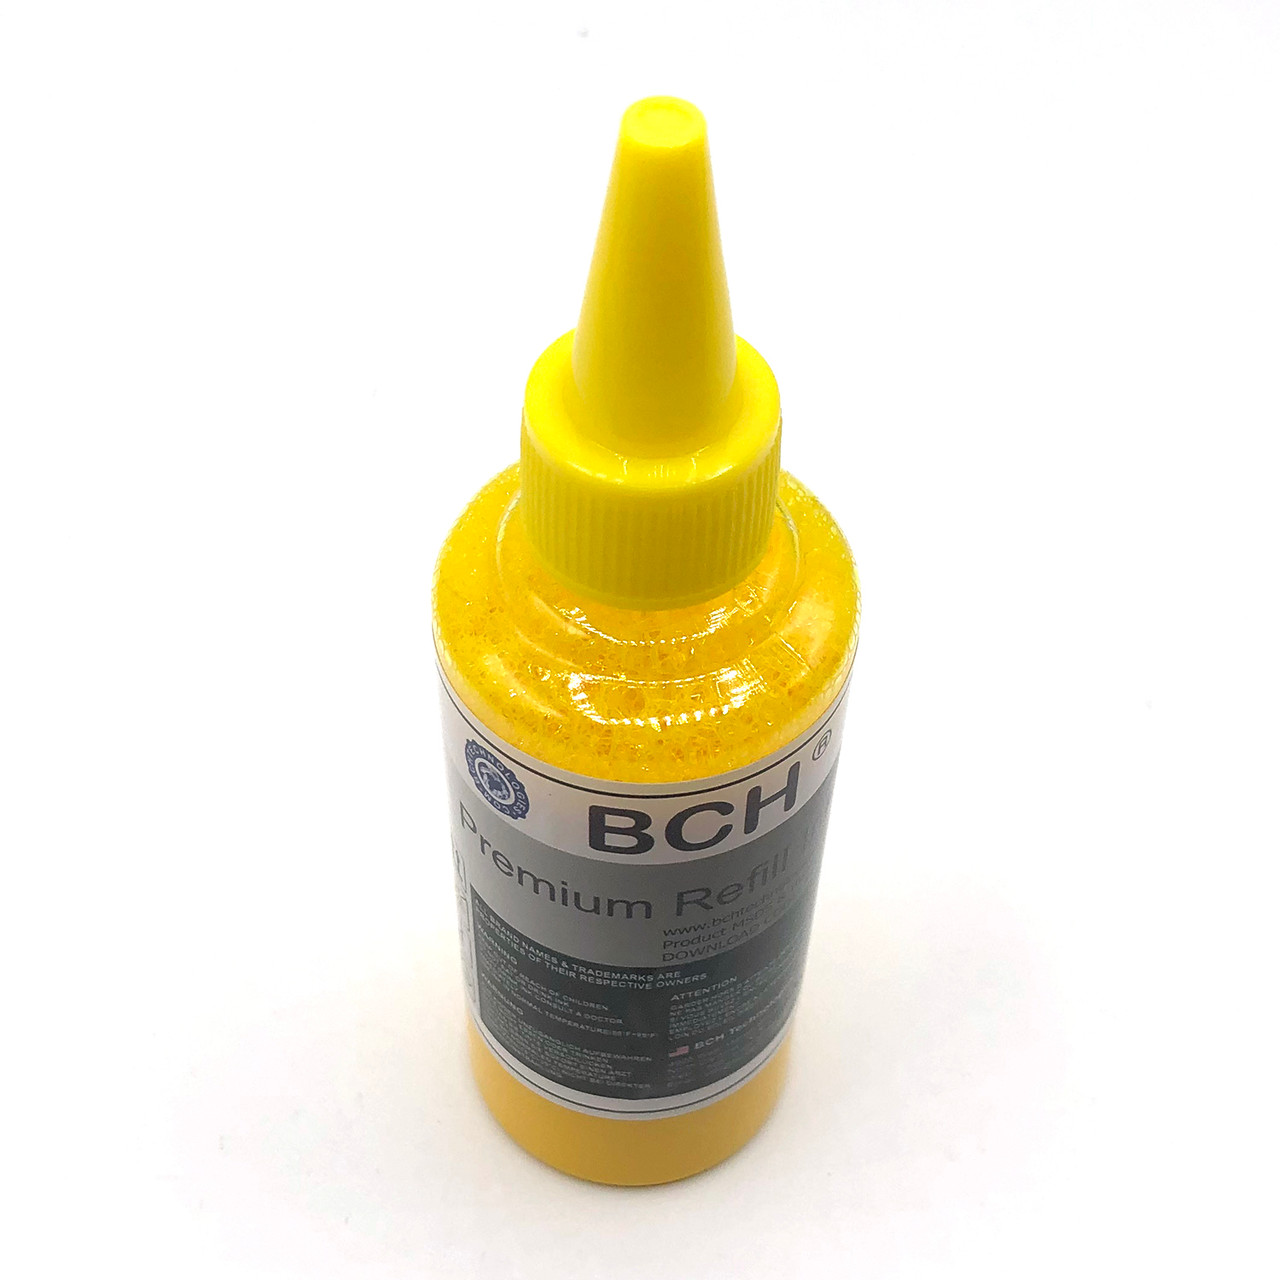 BCH Premium DTF Ink for Inkjet Printer Direct to Film Heat Transfer Printing - 600 ml Total (KCMY+2 White)